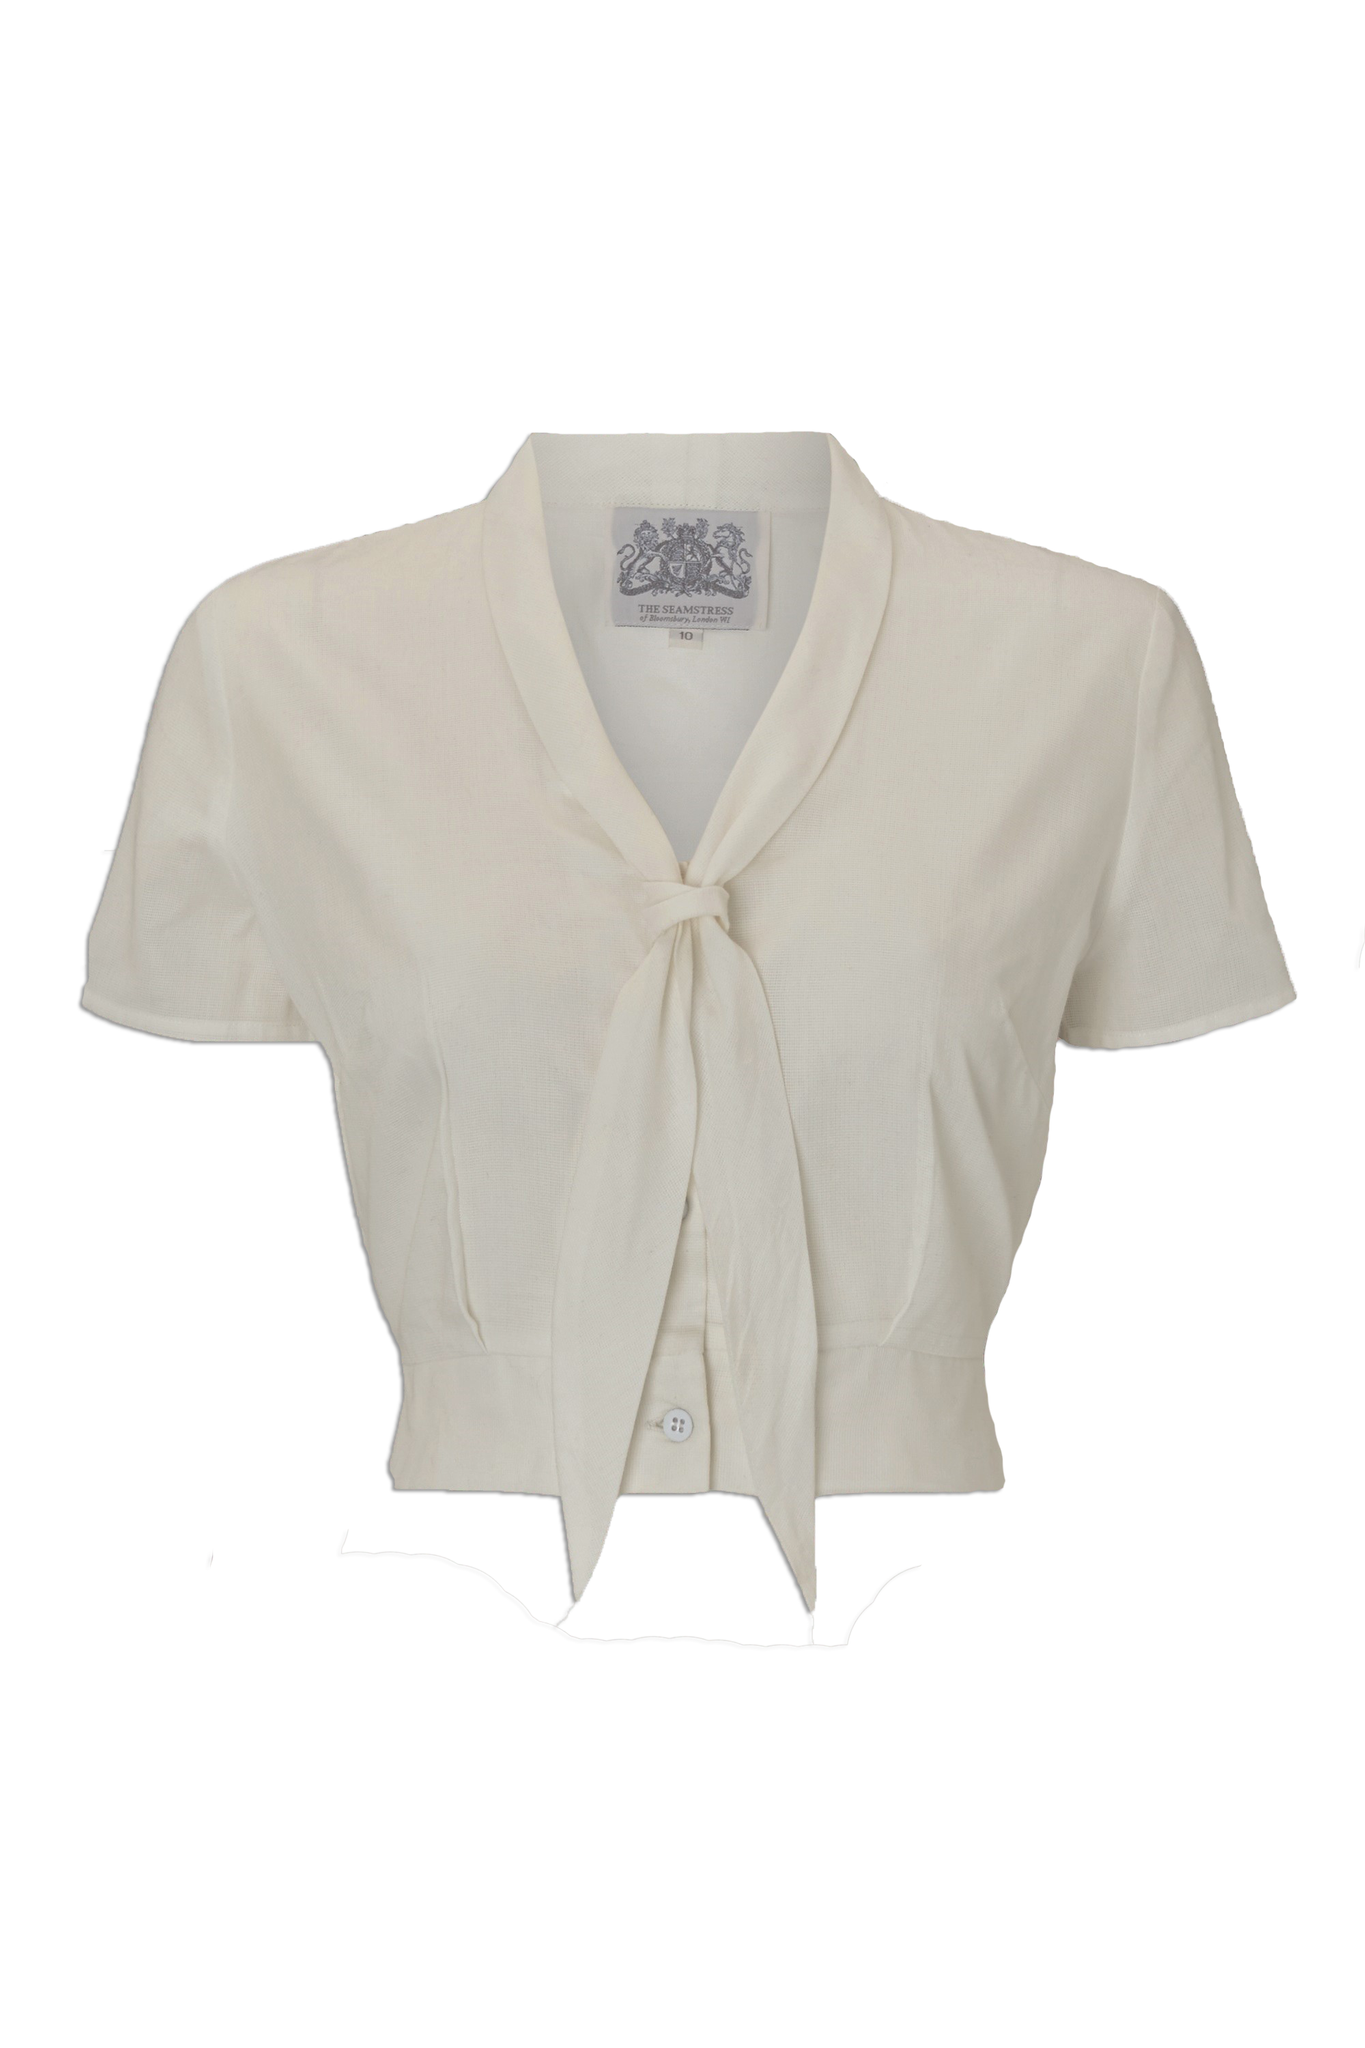 "Bonnie" Blouse Cream by The Seamstress of Bloomsbury, Classic 1940s Vintage Inspired Style - True and authentic vintage style clothing, inspired by the Classic styles of CC41 , WW2 and the fun 1950s RocknRoll era, for everyday wear plus events like Goodwood Revival, Twinwood Festival and Viva Las Vegas Rockabilly Weekend Rock n Romance The Seamstress Of Bloomsbury